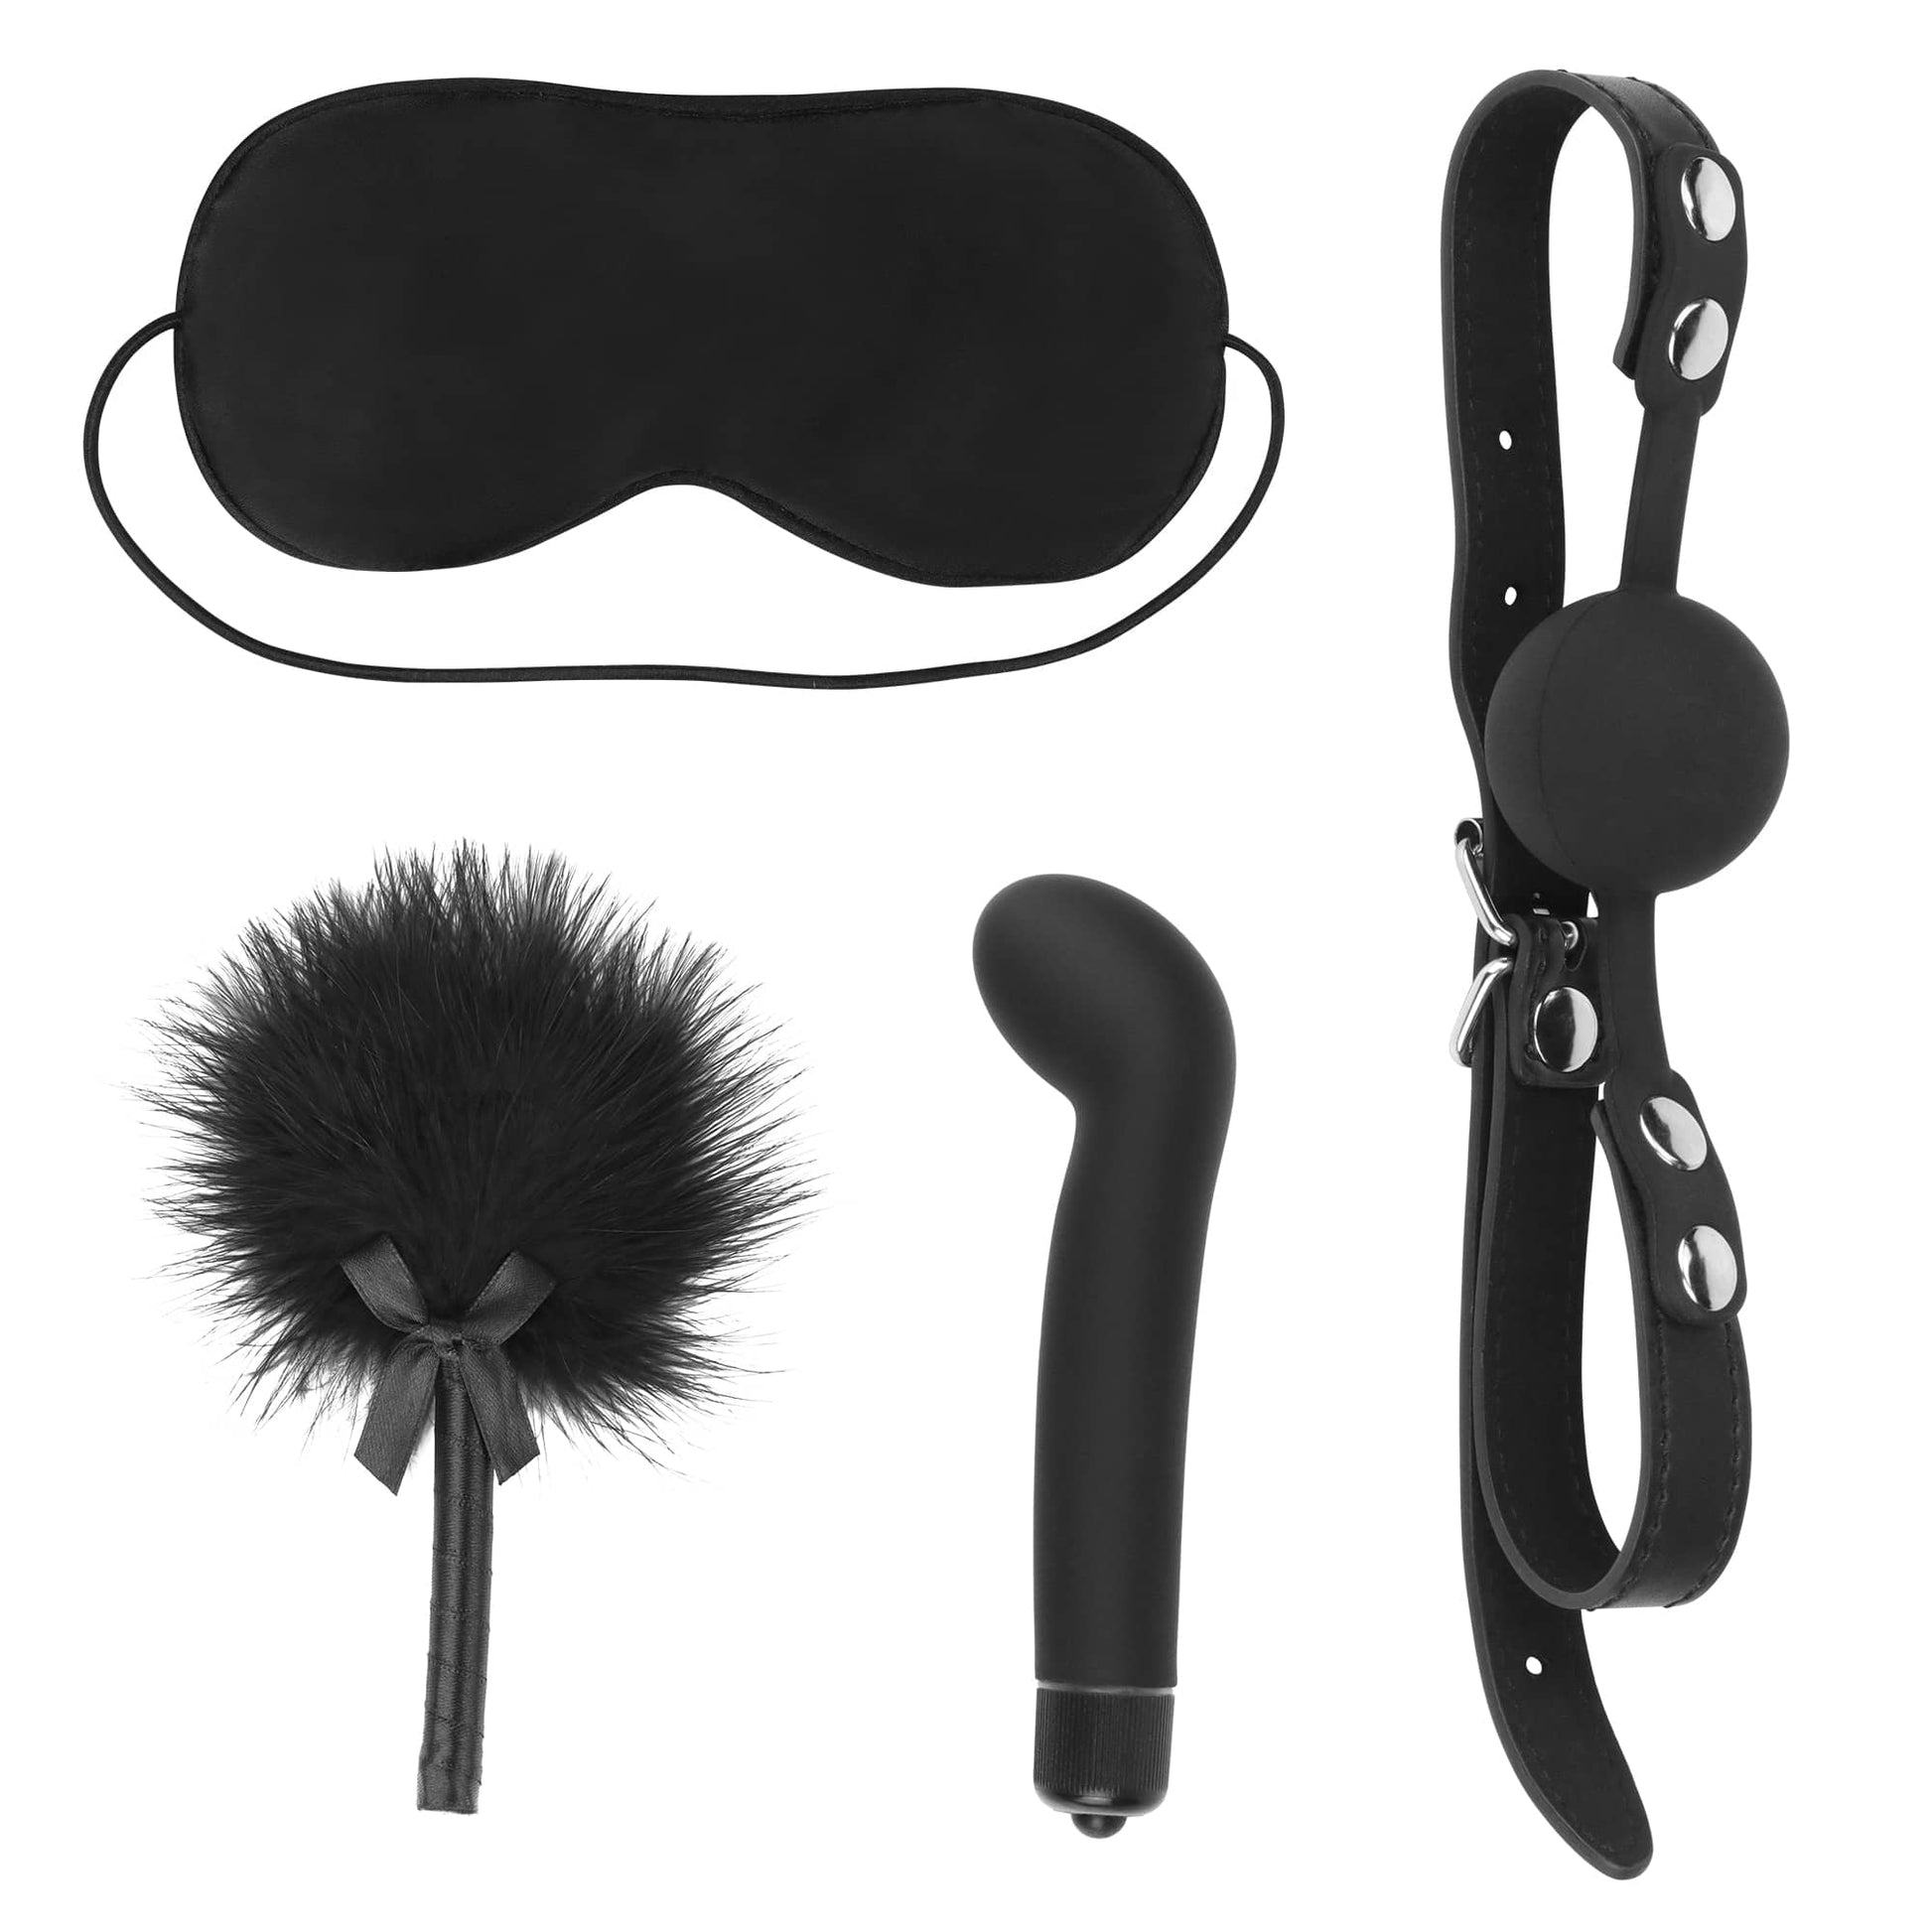 The bdsm bondage sets has g spot vibrator and blindfold and ball gag and feather tickler